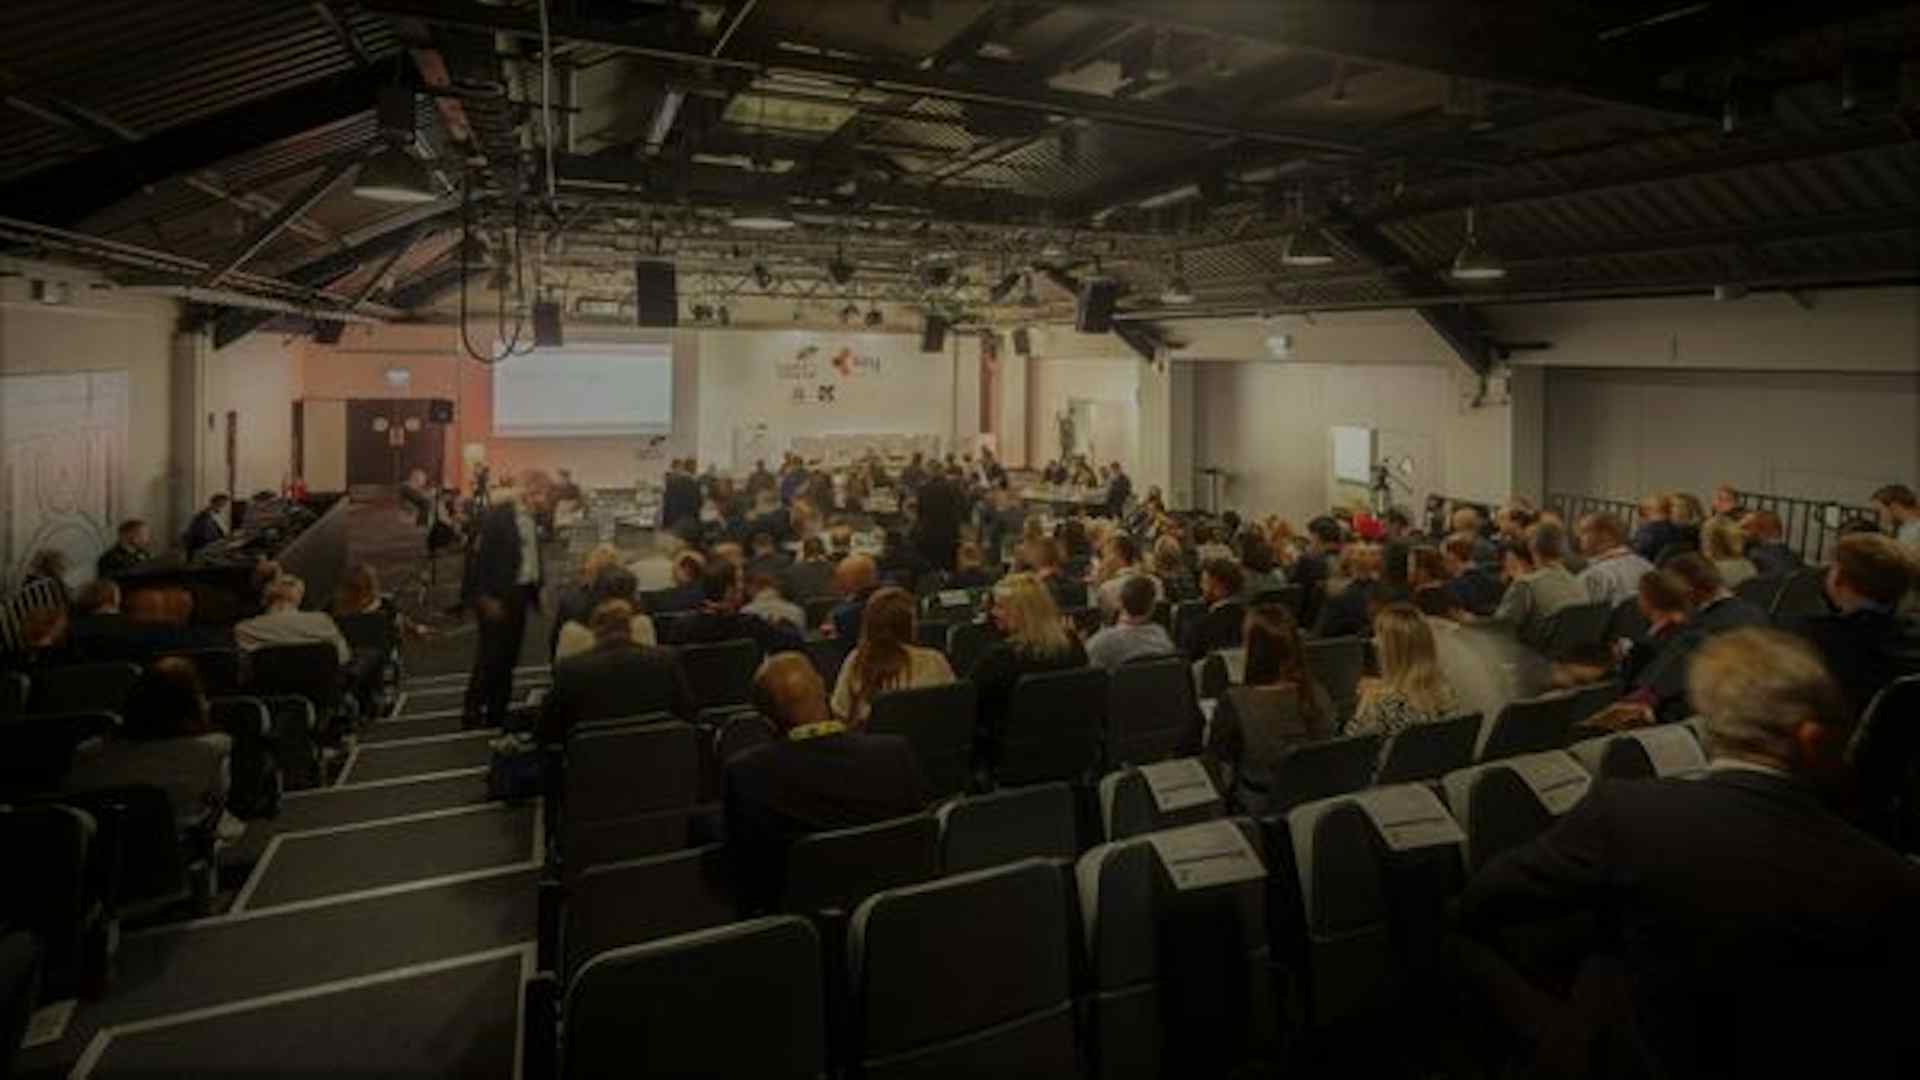 The Top 5 Large Conference Venues in London